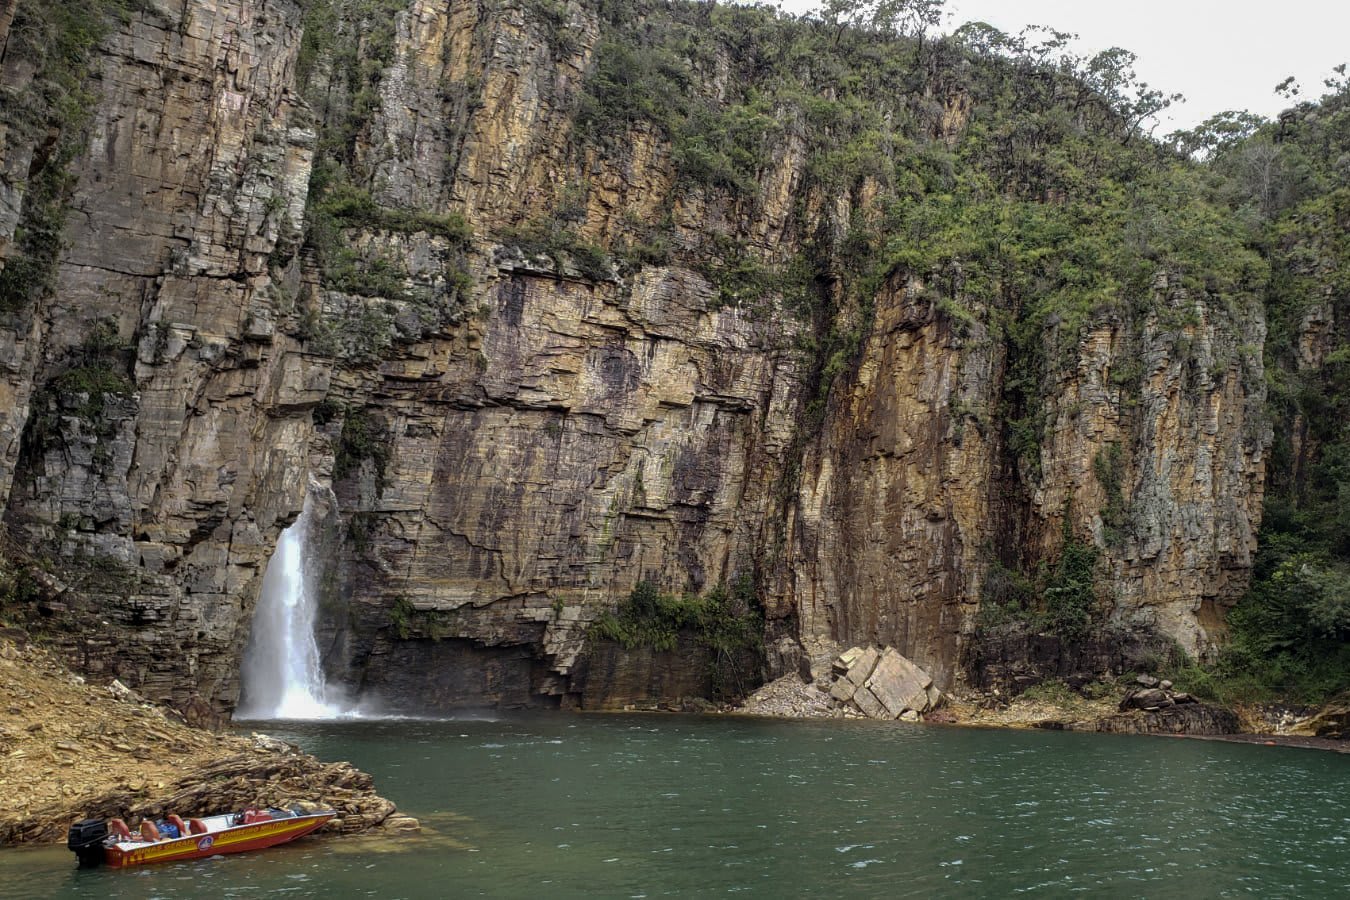 Wall of rock falls on boaters on Brazilian lake killing at least 6, injuring 32